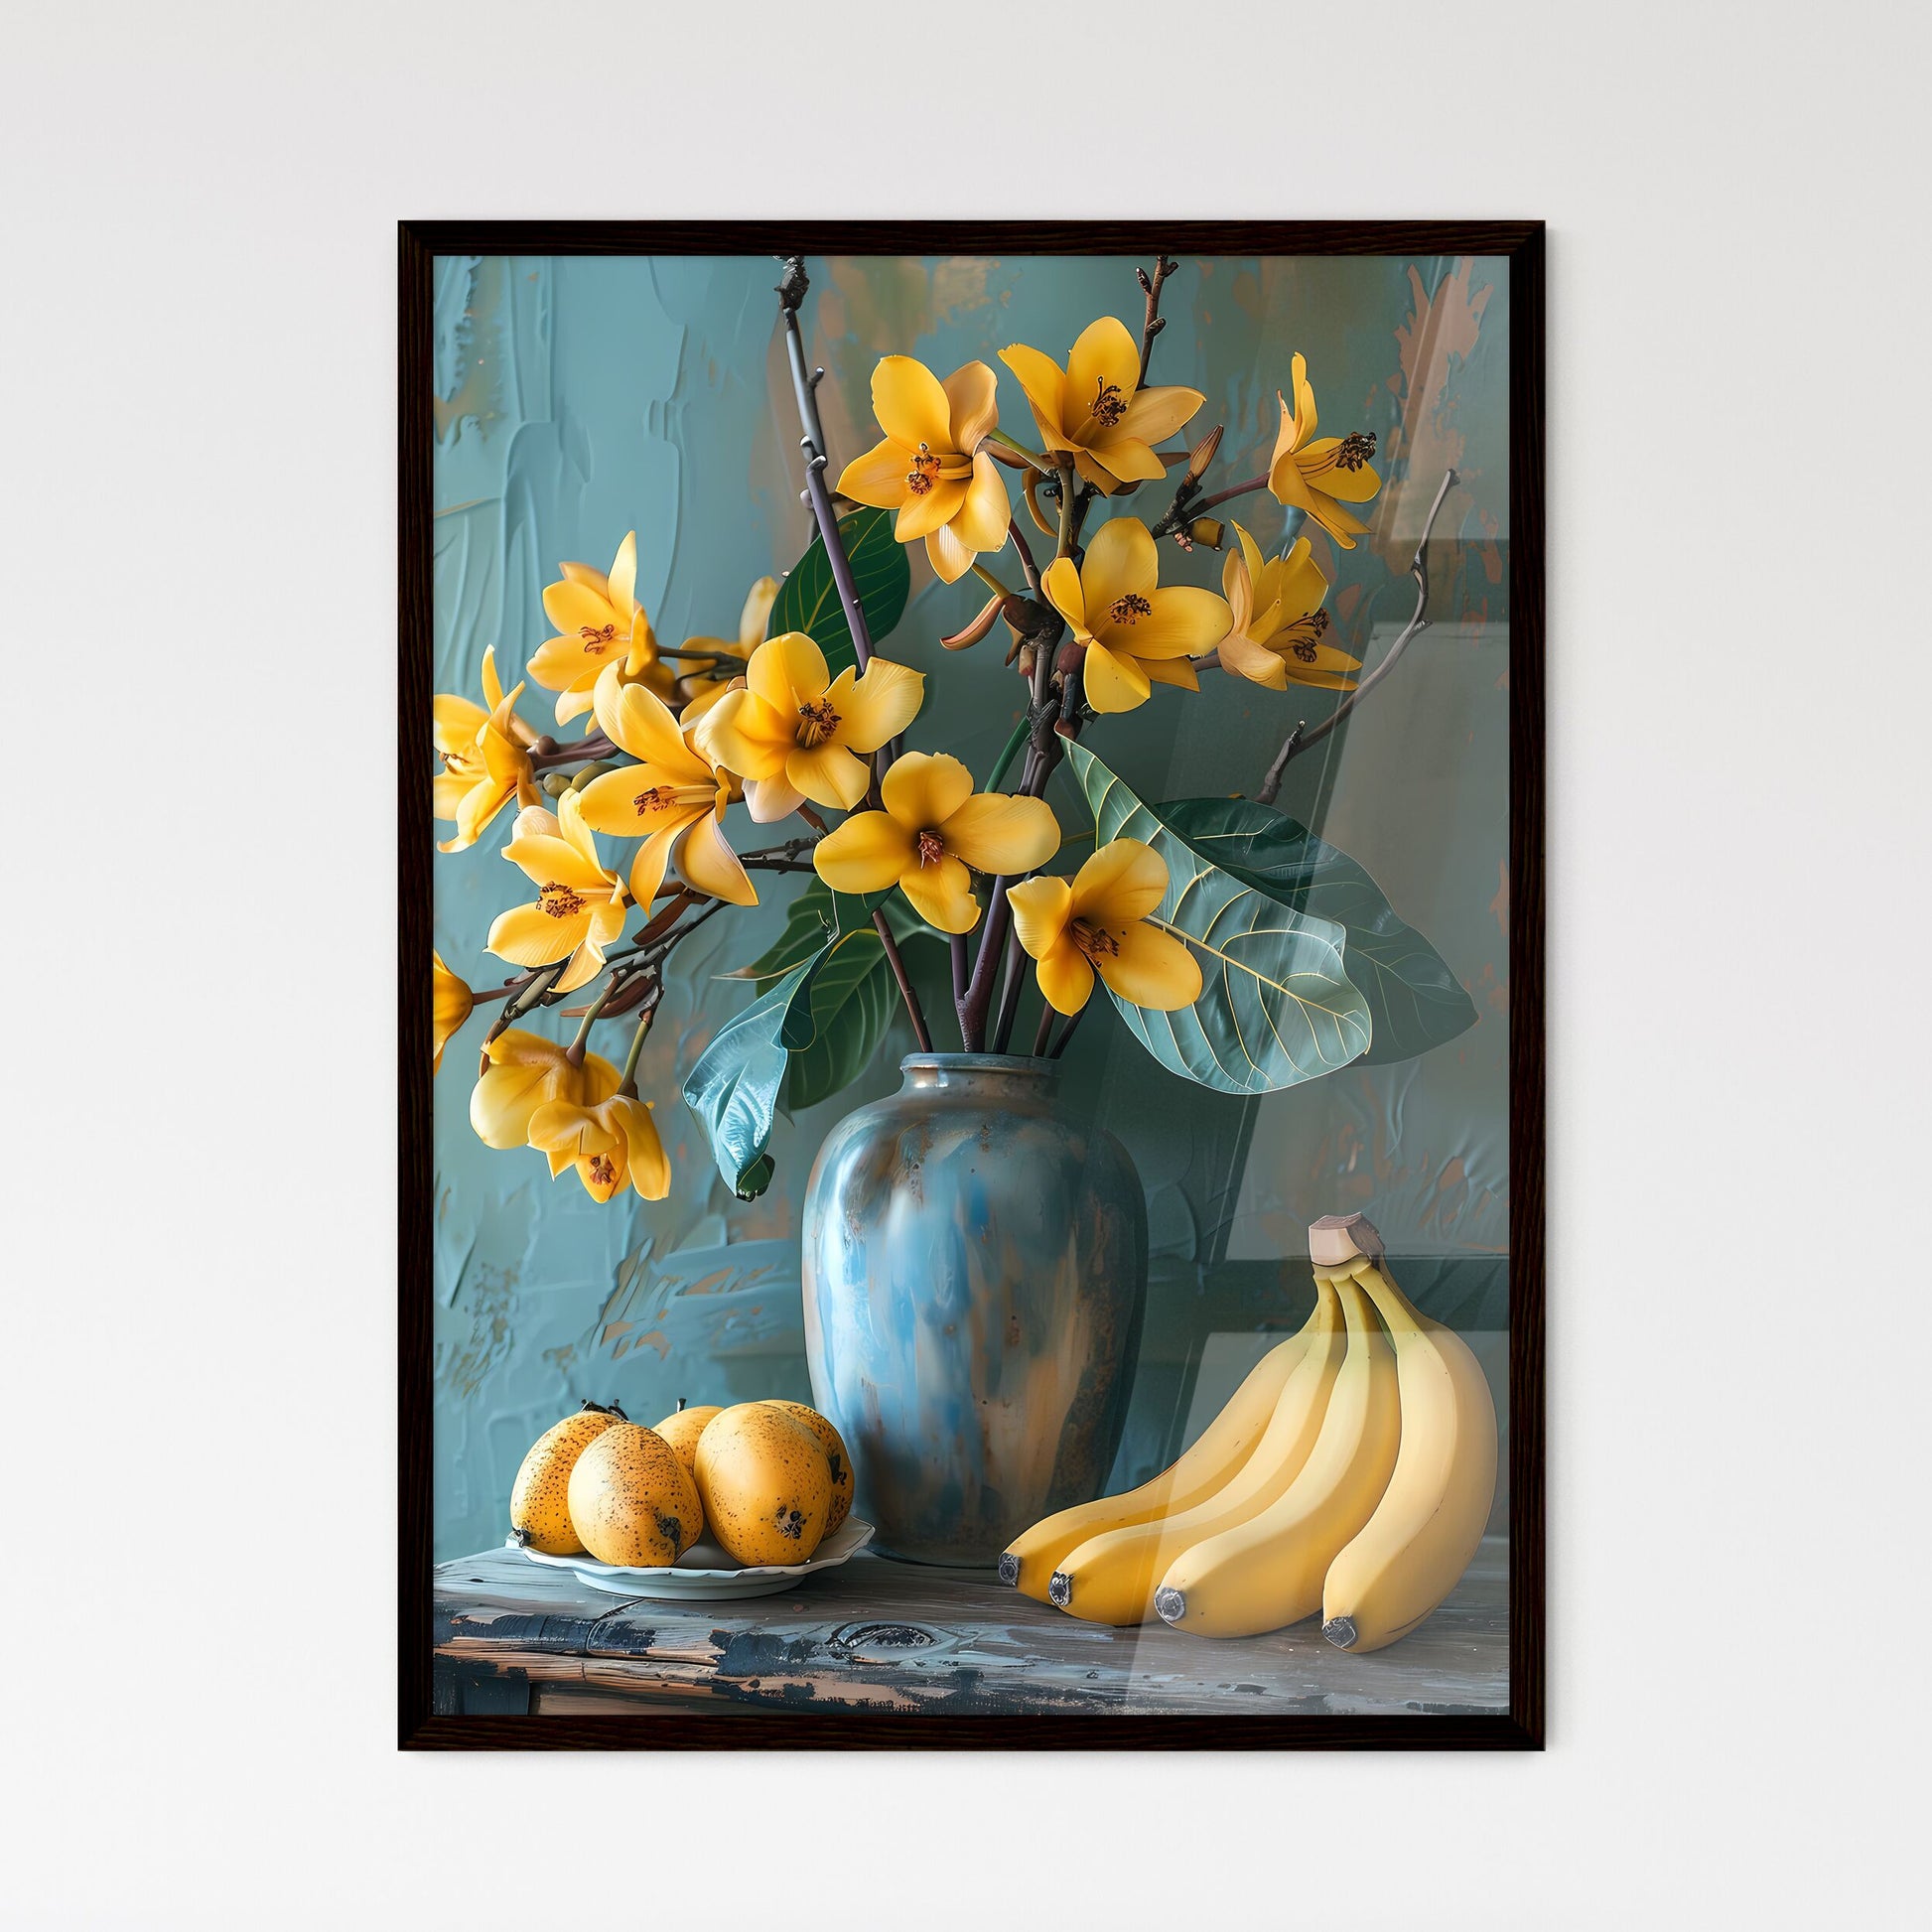 Rustic Still Life: Bananas and Floral Symphony on Patina Wall, a Canvas Masterpiece Default Title